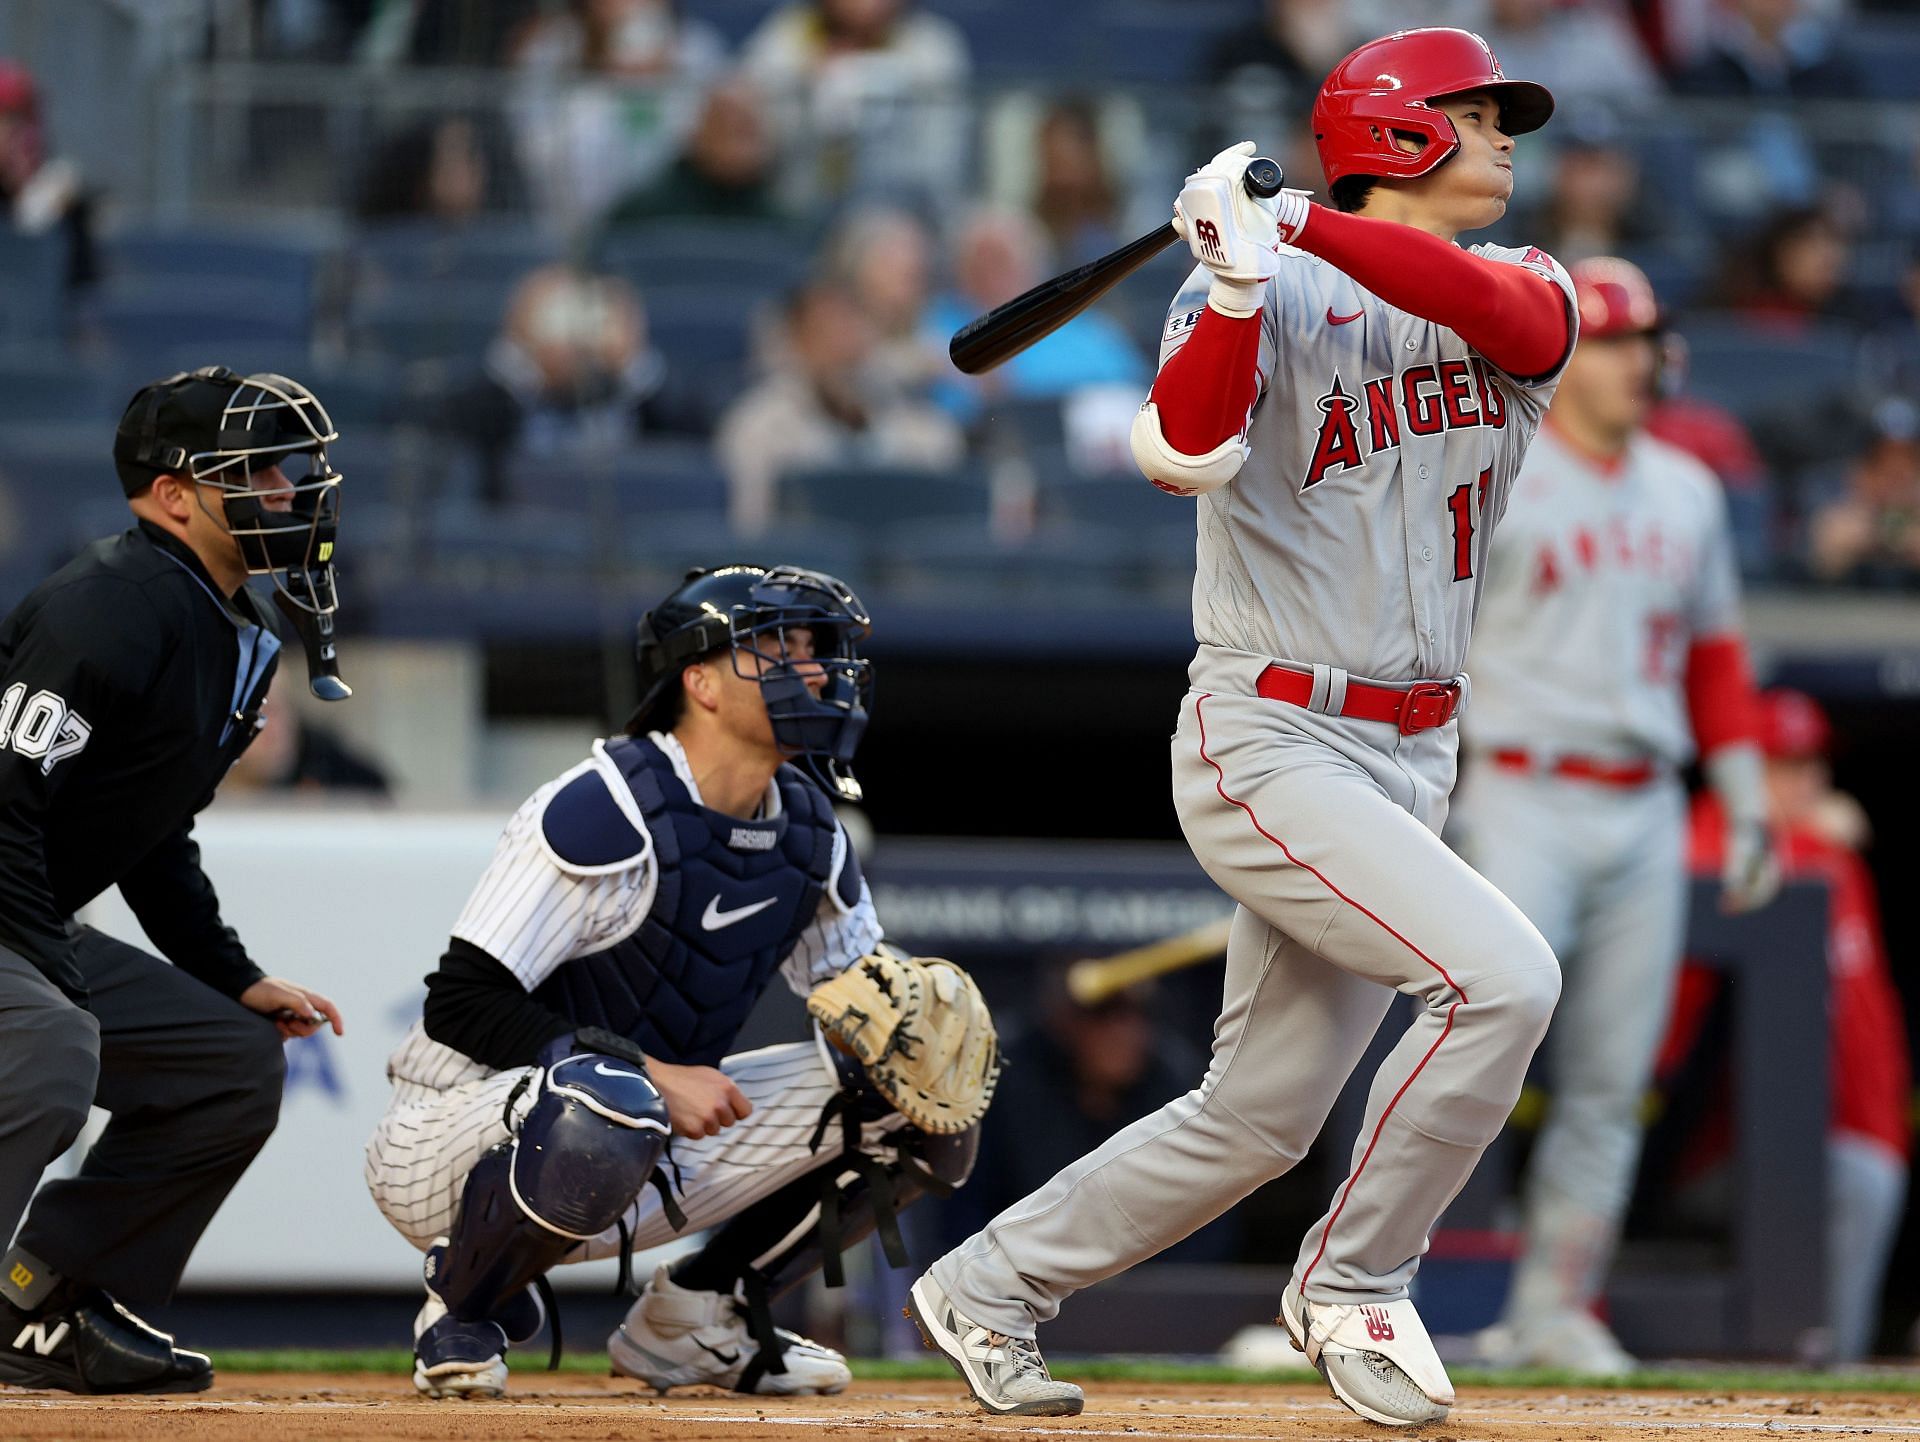 Yankees Angels Stream Yankees vs Angels MLB Live TV Listings, Streaming Options, Predicted Lineups, and more April 19